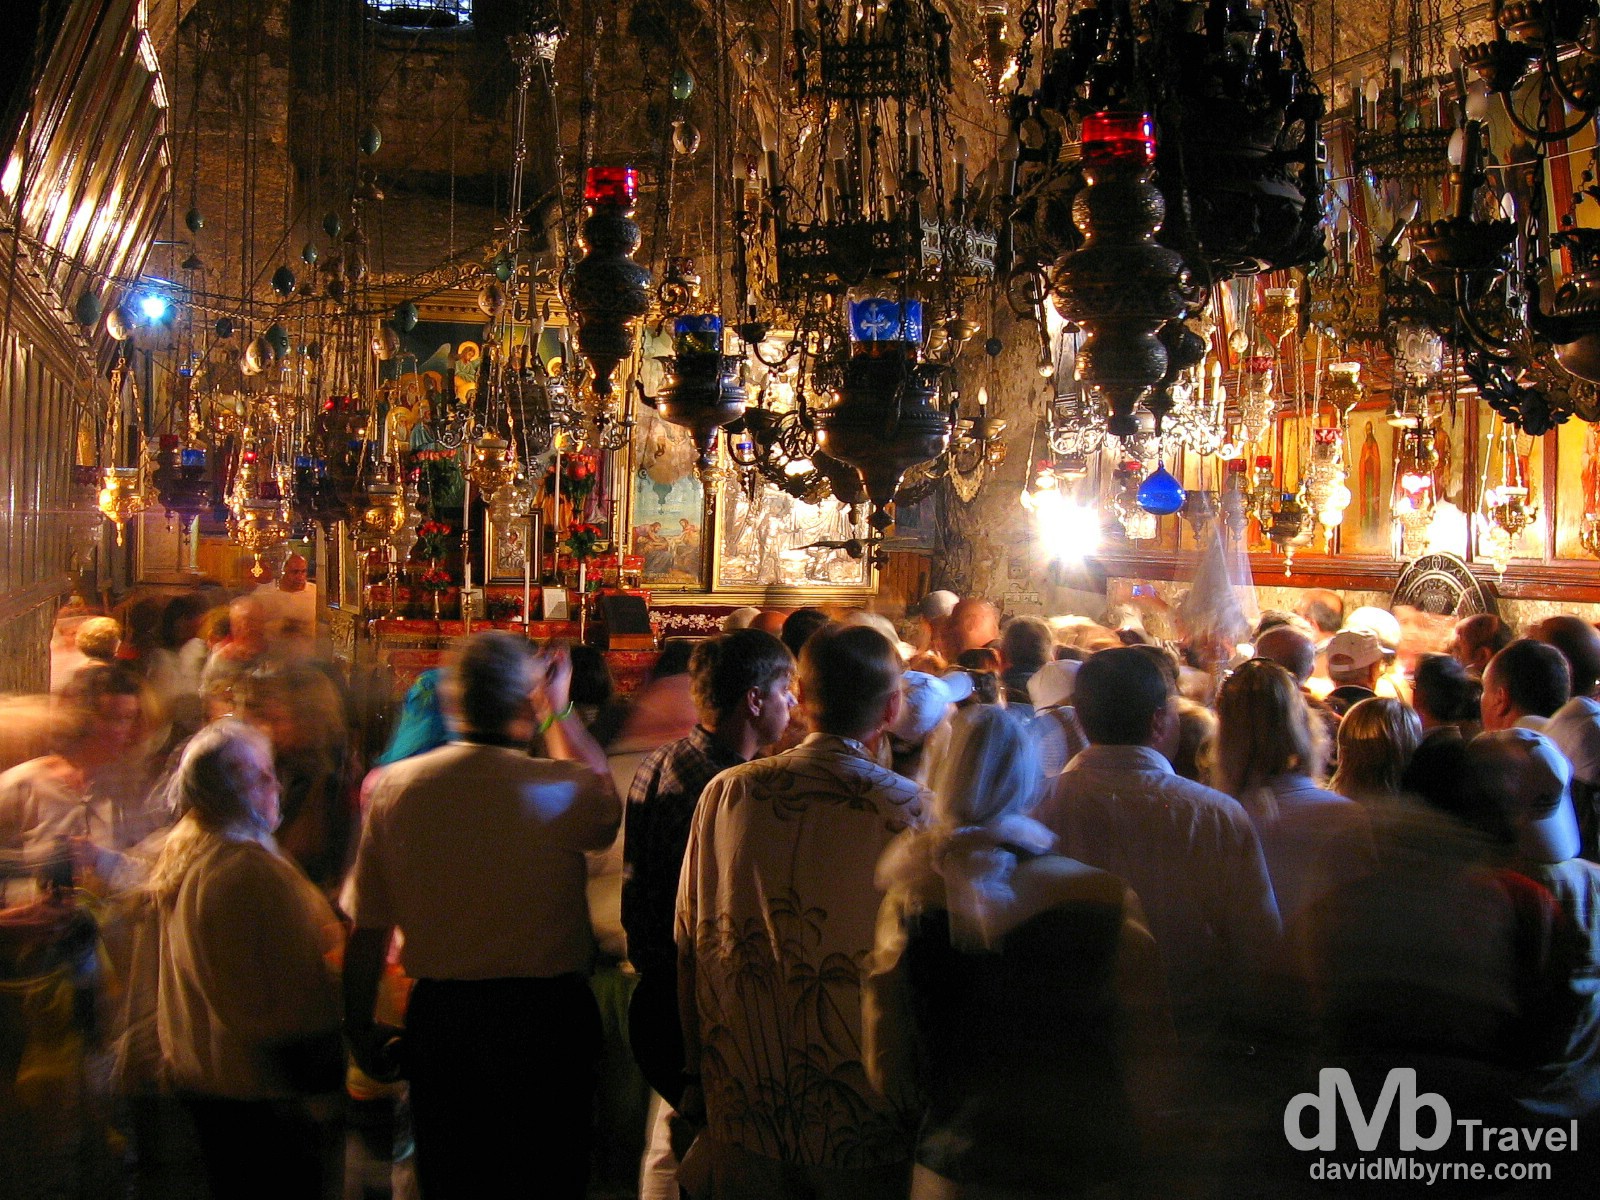 The interior of the Tomb of the Virgin Mary, aka Church of the Sepulchre of Saint Mary, Kidron Valley, Jerusalem, Israel. May 1, 2008.   Church of the Assumption,  (Mary's Tomb) Jerusalem Isarel